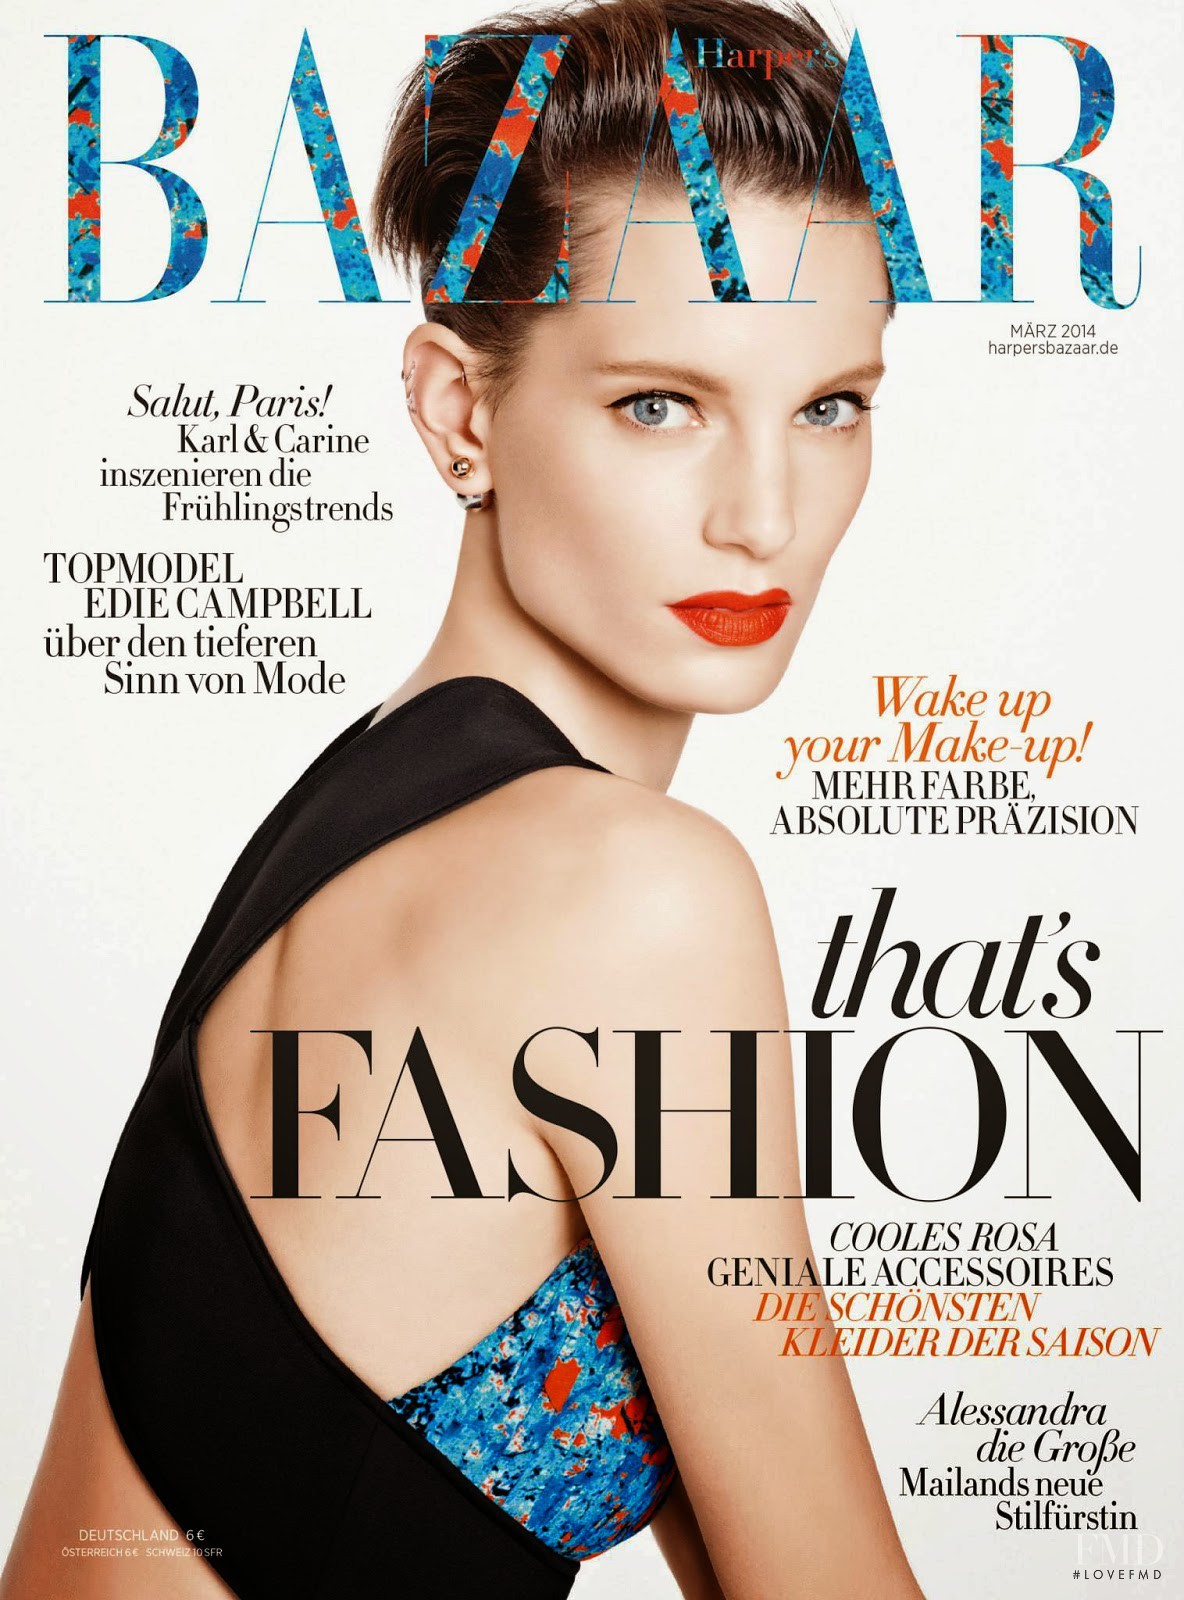 Cover of Harper's Bazaar Germany with Iris Strubegger, March 2014 (ID ...